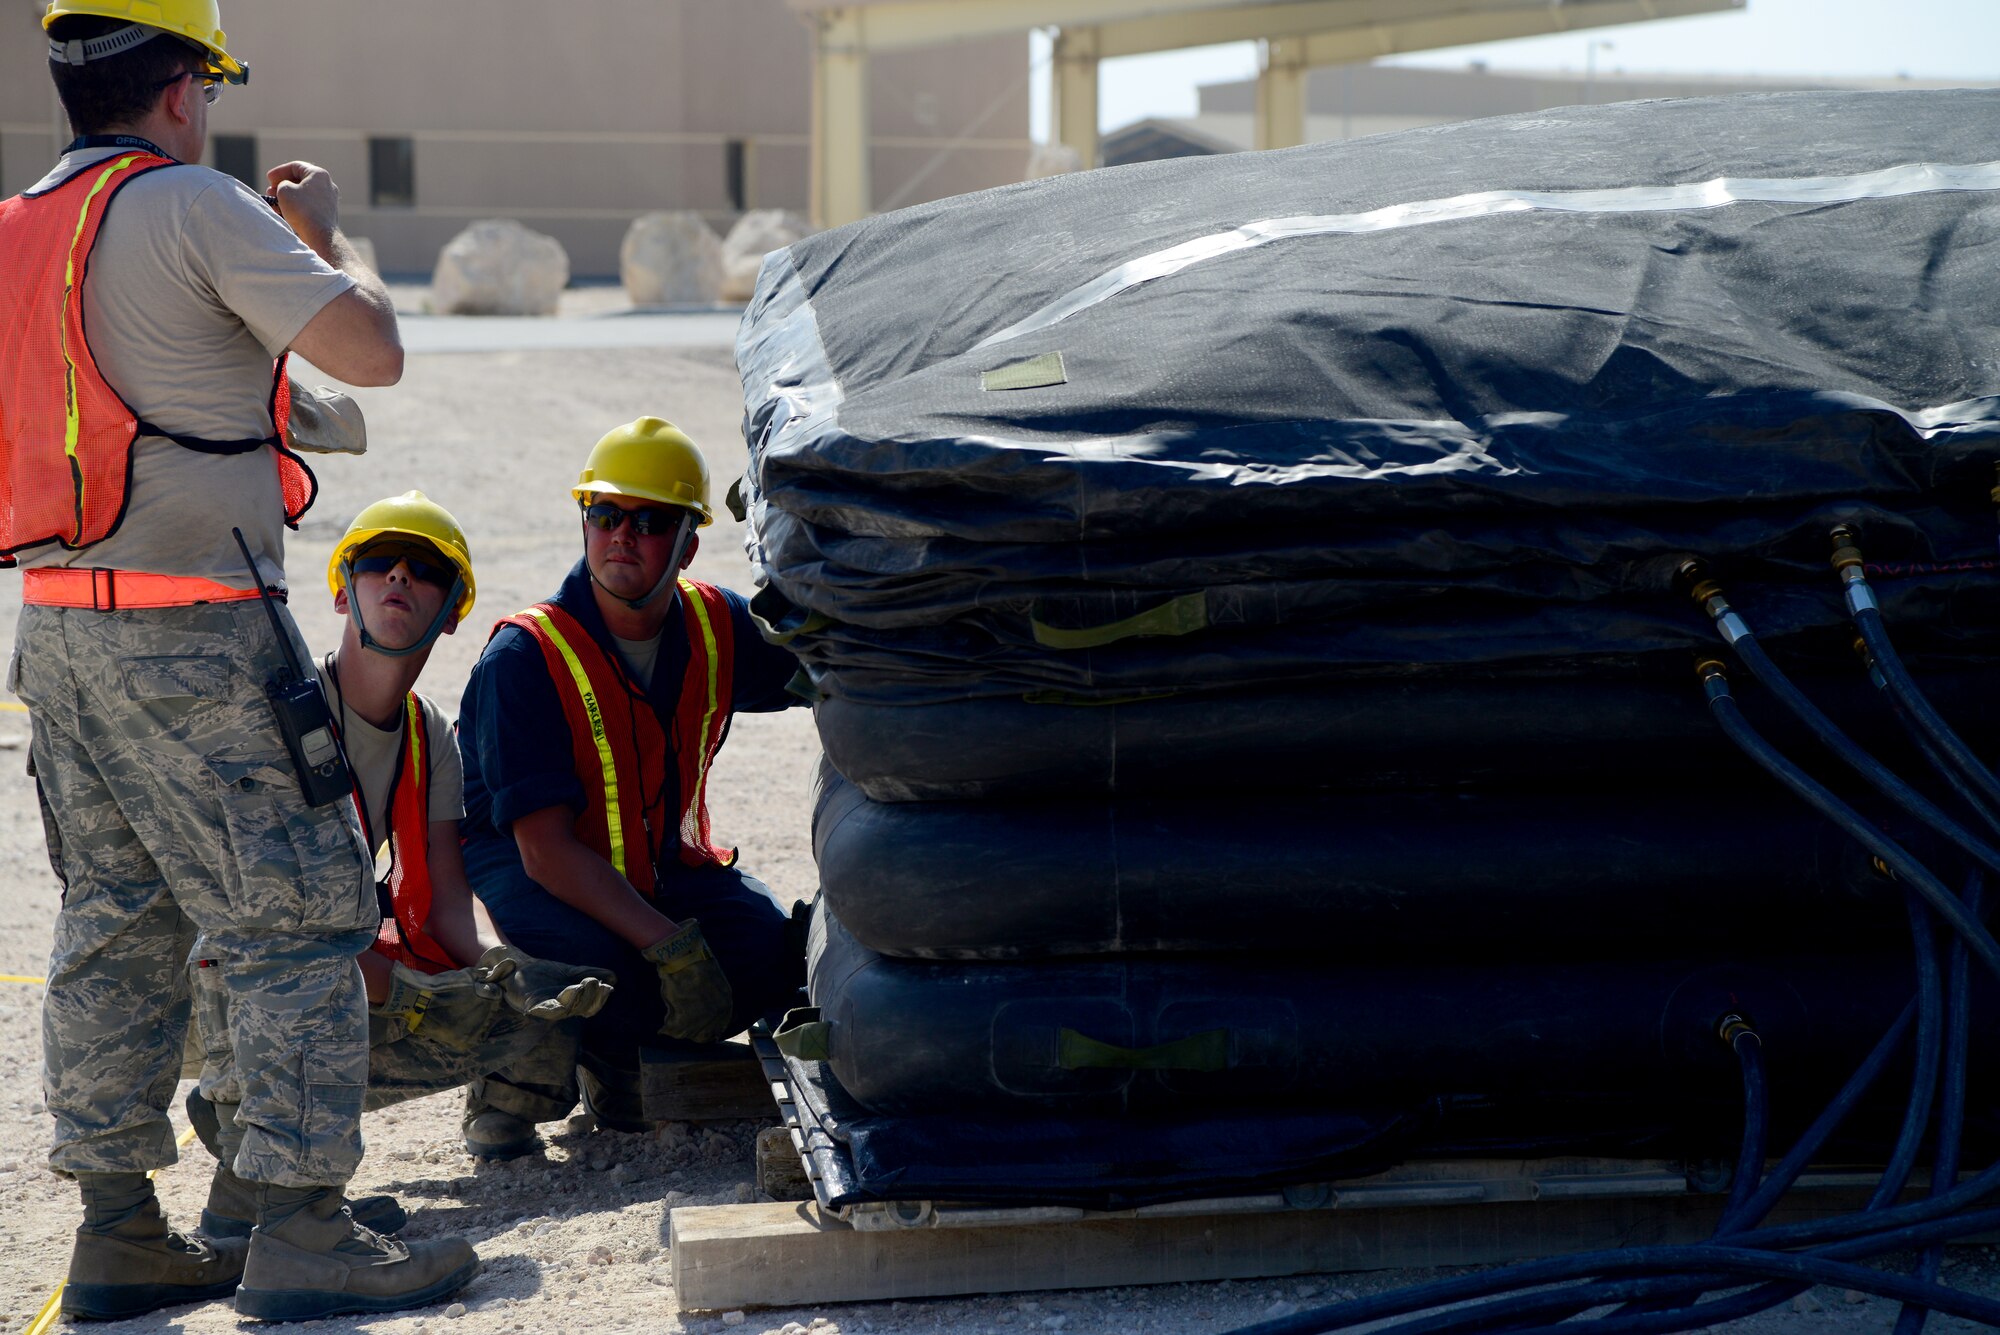 U.S. Air Force Airmen from the 379th Expeditionary Maintenance Group Crashed, Damaged, Disabled Aircraft Recovery (CDDAR) team wait for an airbag to inflate during an exercise, Nov. 11, 2014, at Al Udeid Air Base, Qatar. The air bags are just one of the many tools available to the team to assist them in repairing damaged aircraft. (U.S. Air Force photo by Senior Airman Kia Atkins)